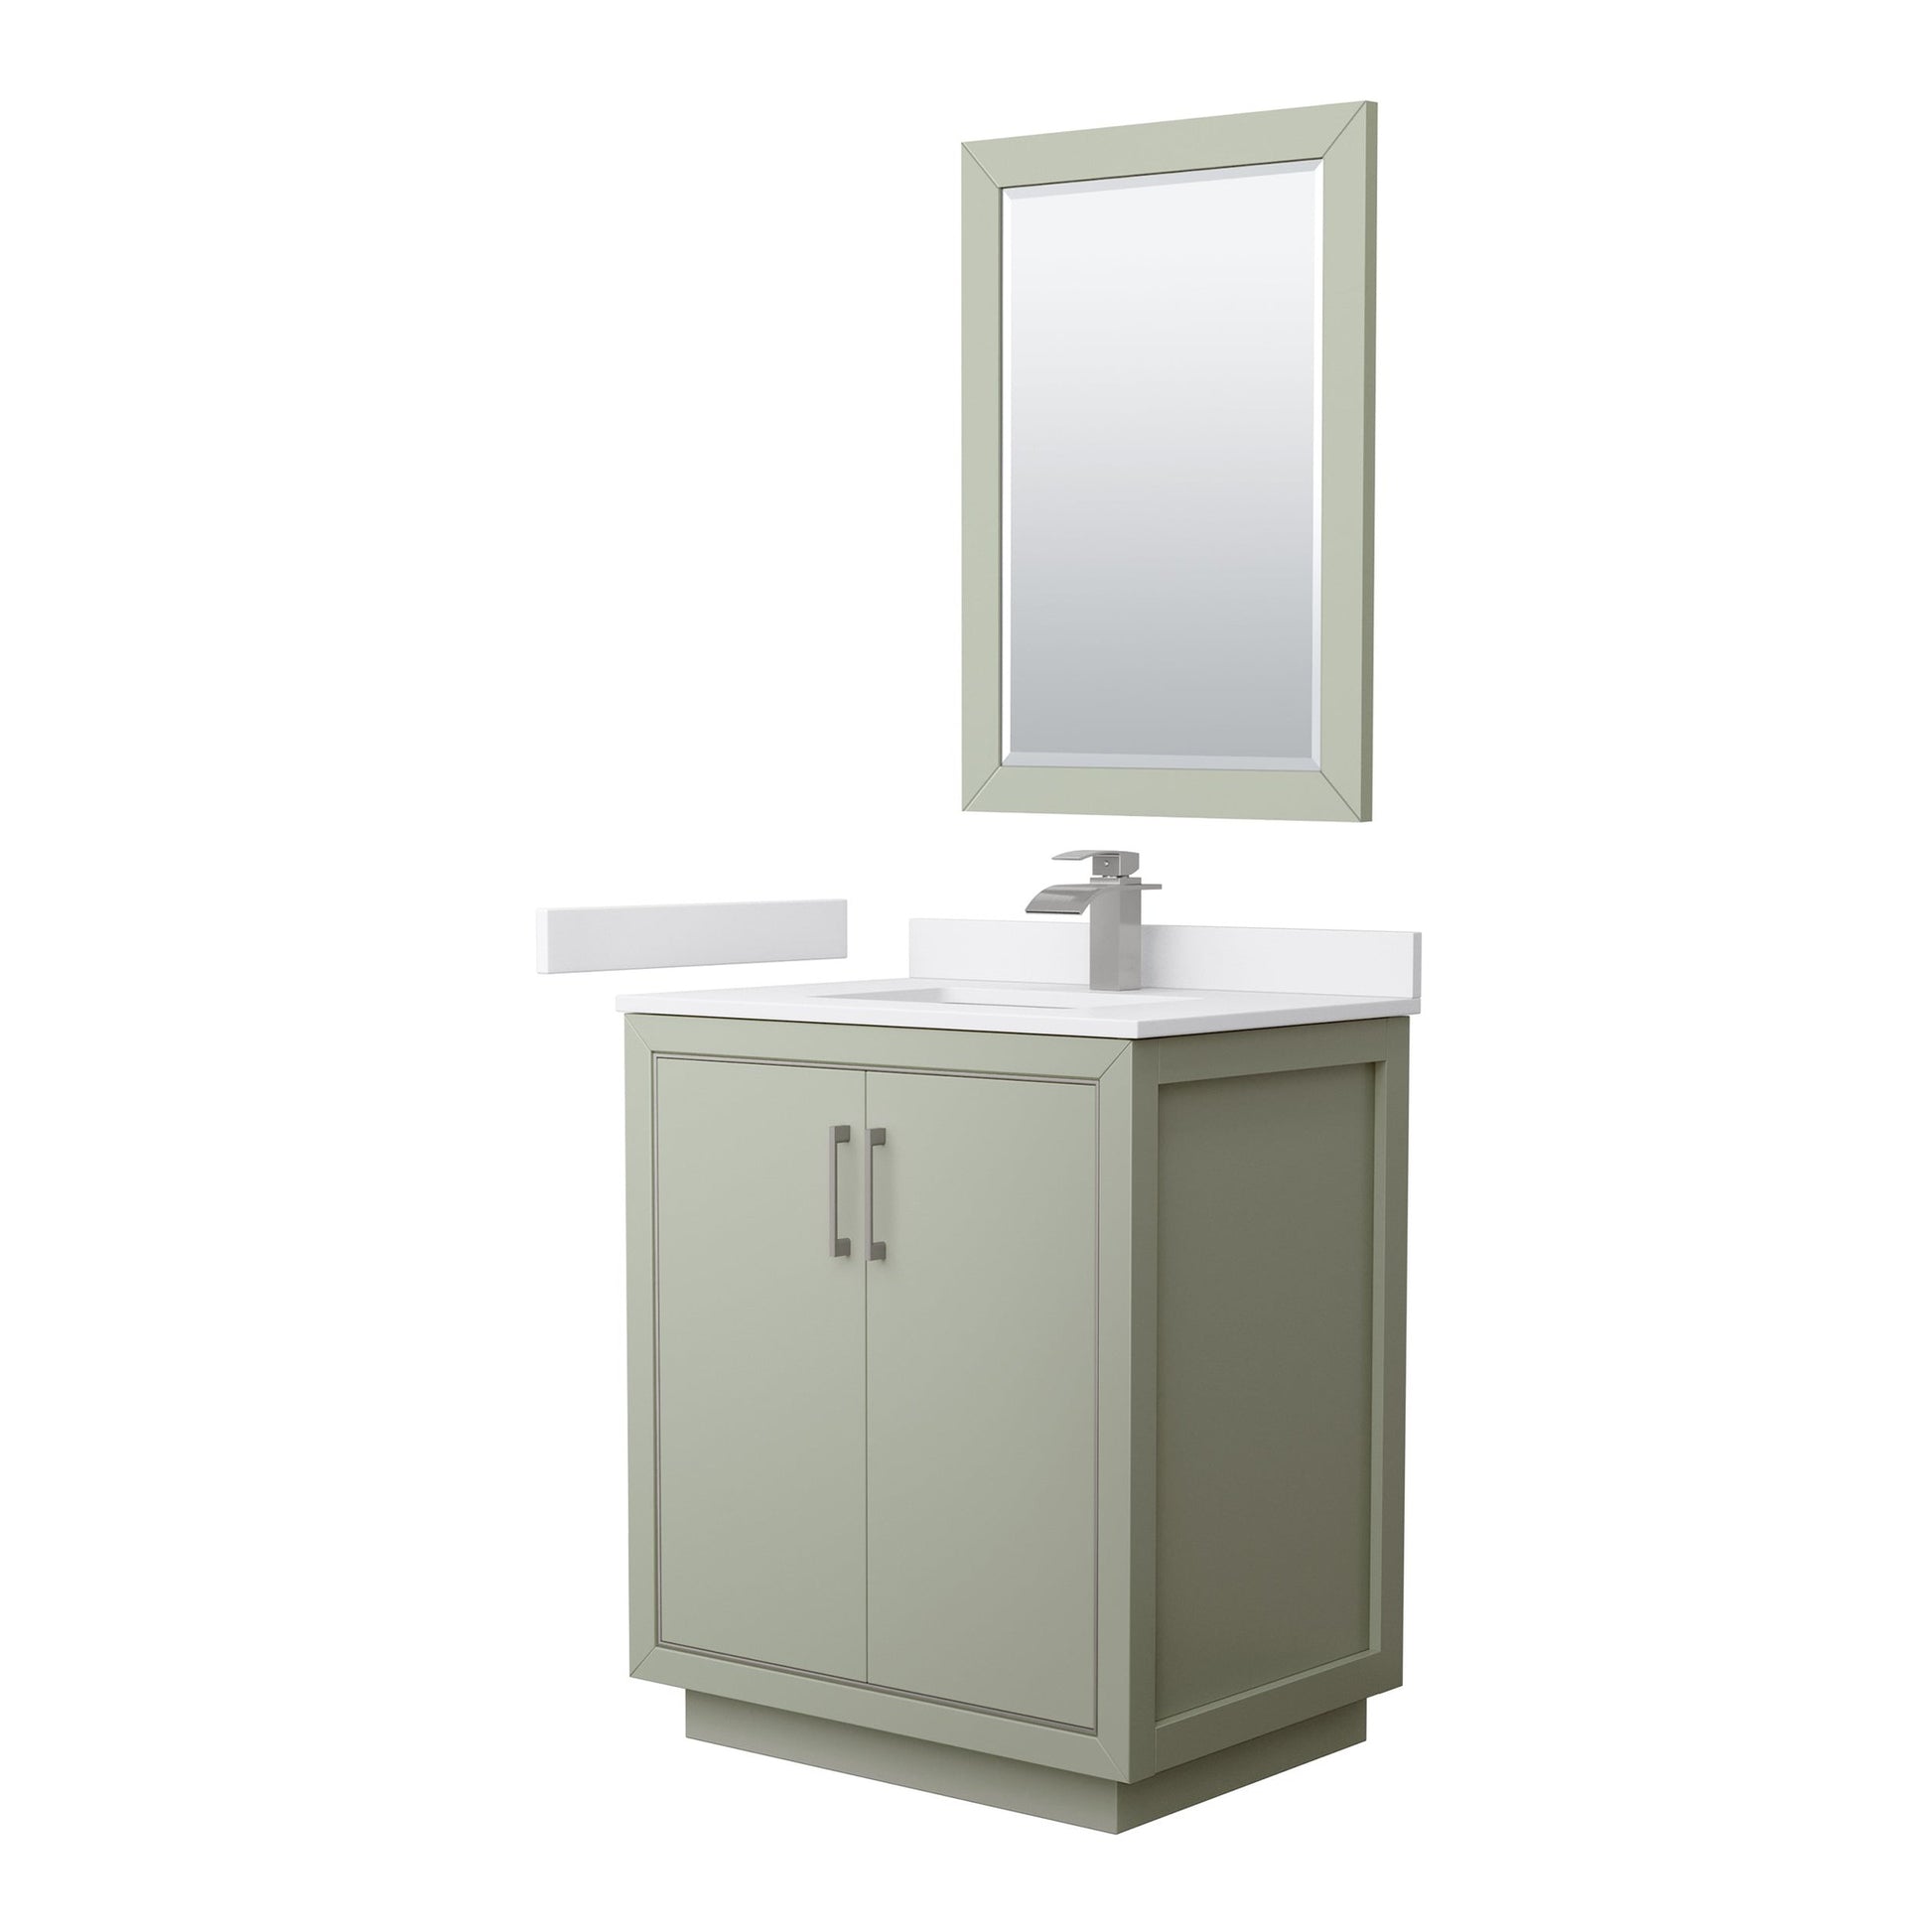 Wyndham Collection Icon 30" Single Bathroom Vanity in Light Green, White Cultured Marble Countertop, Undermount Square Sink, Brushed Nickel Trim, 24" Mirror